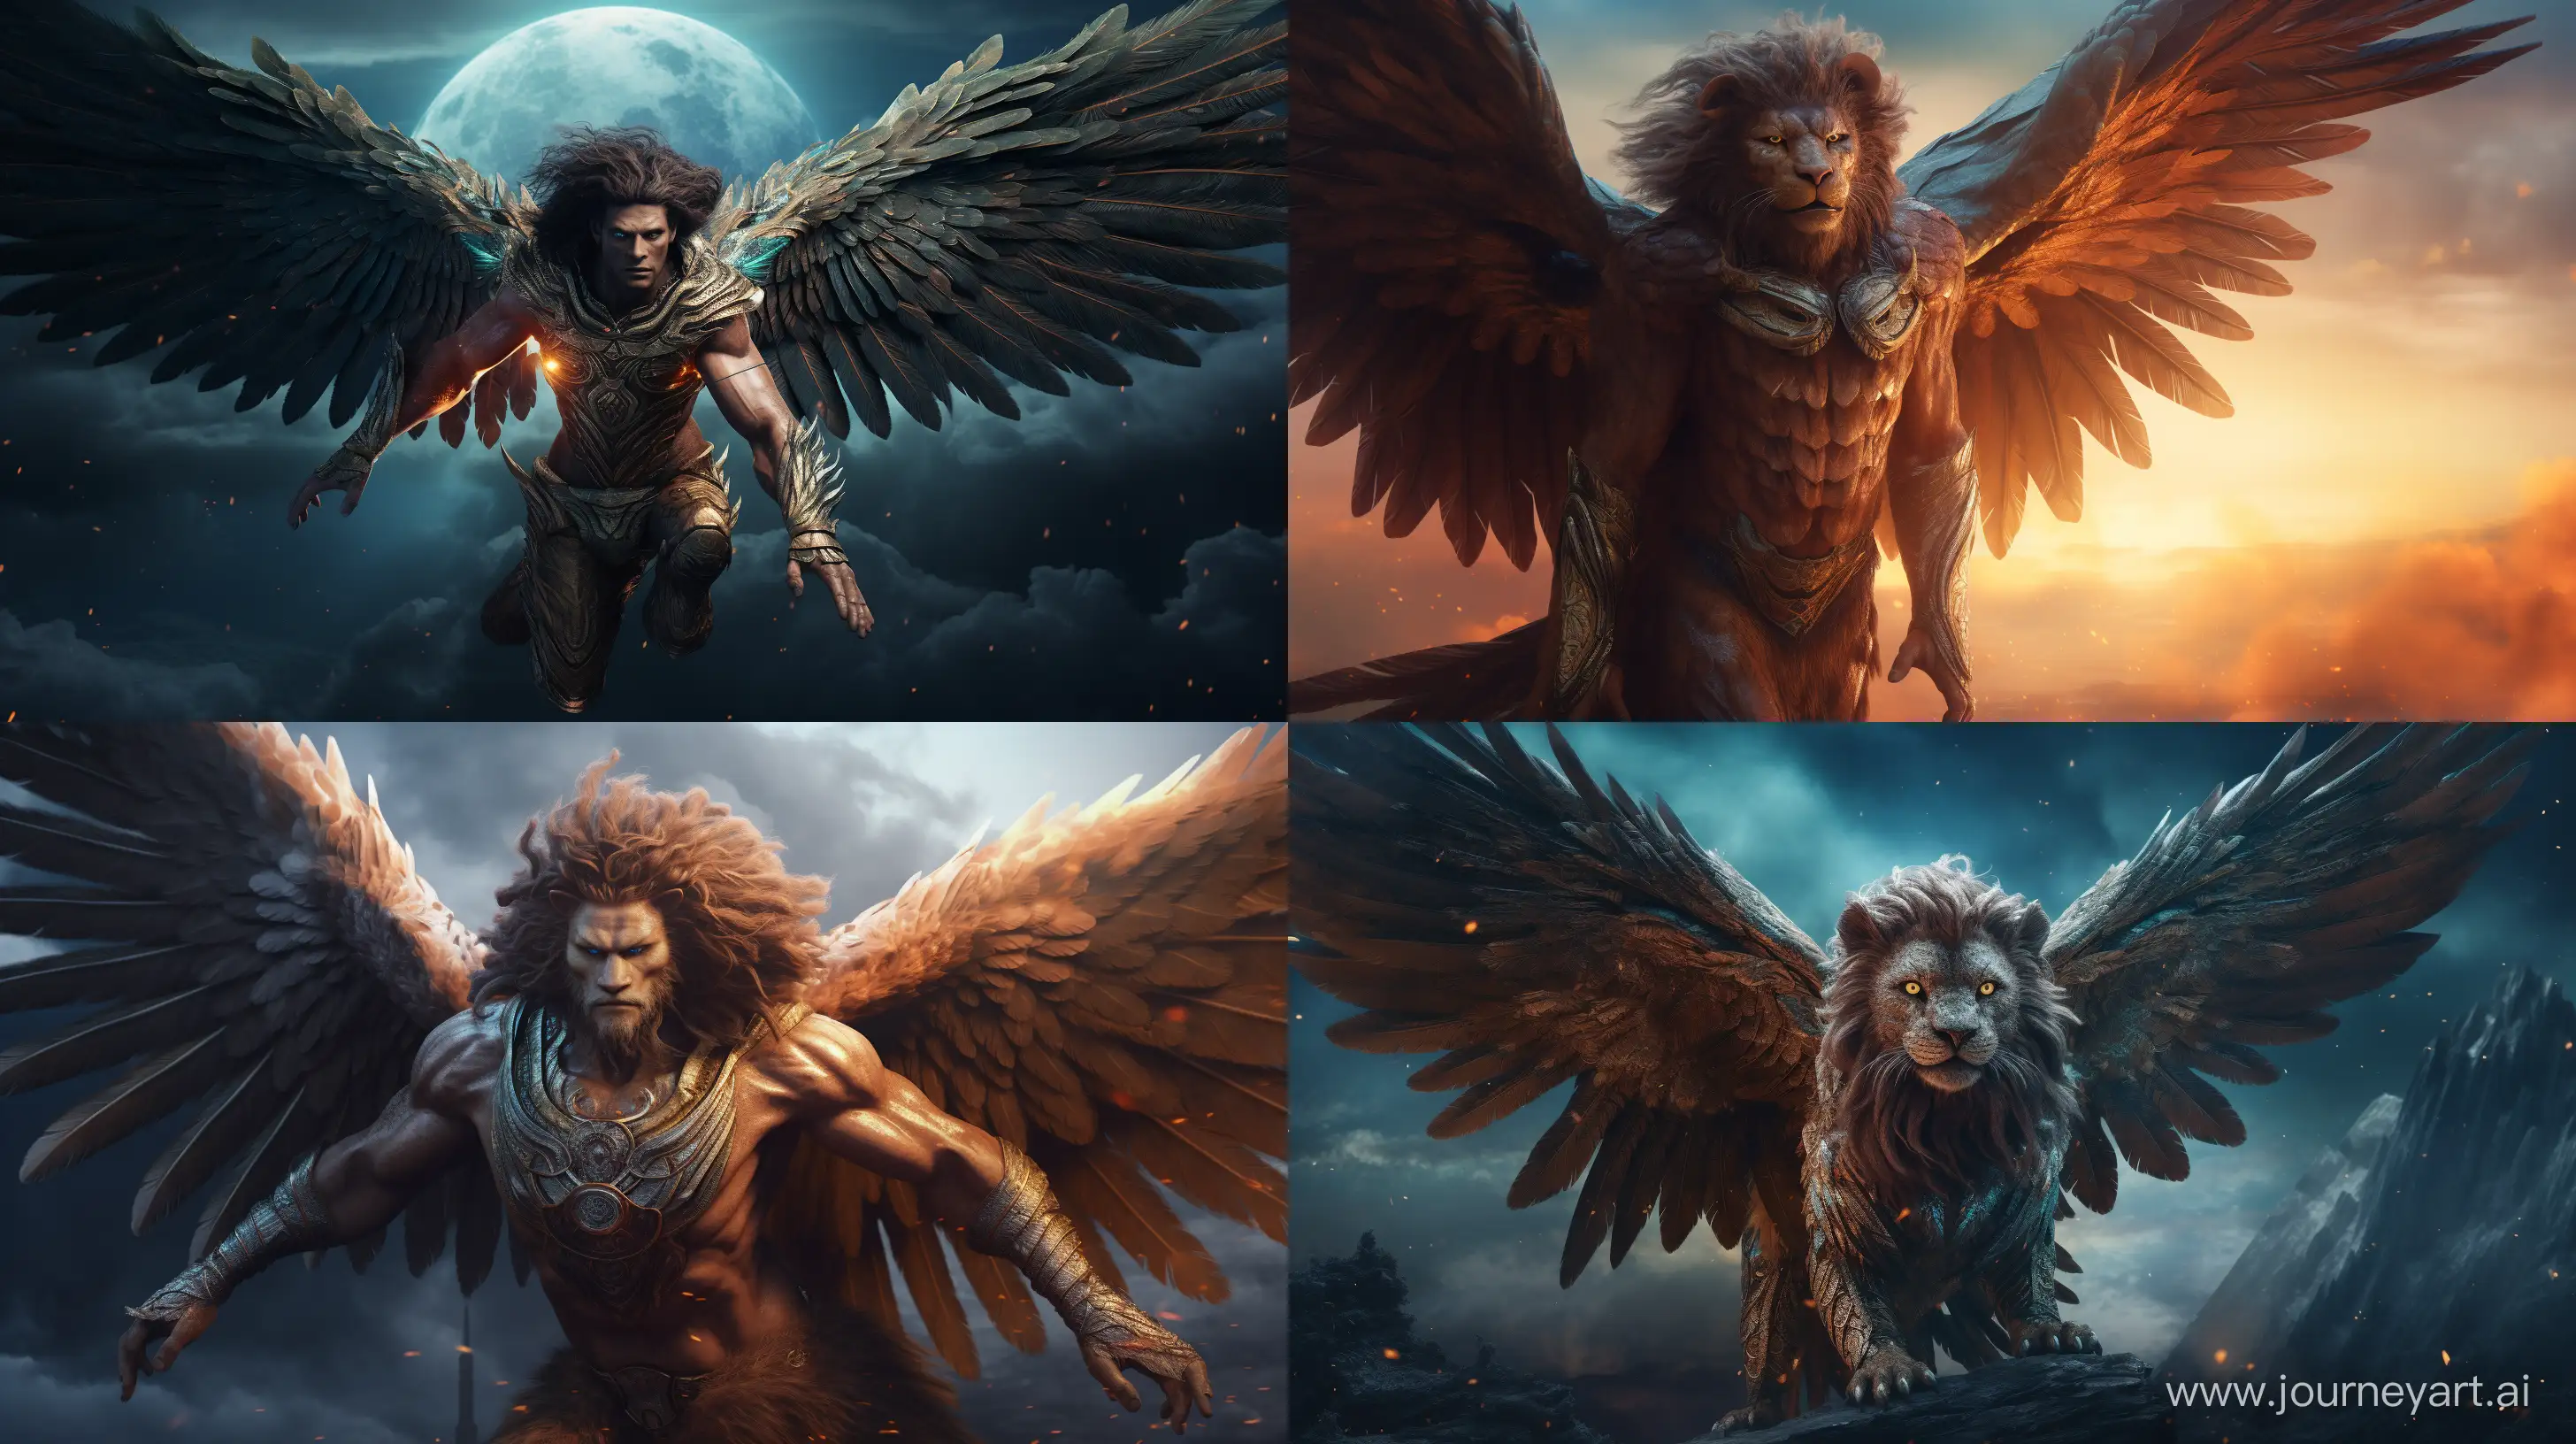 Realistic images depicting a creature with the body of a Lion and has wings from Hindu mythology, fierce look on his face, floating in the sky, celestial sky in the background, intricate details, 8k quality images --ar 16:9 